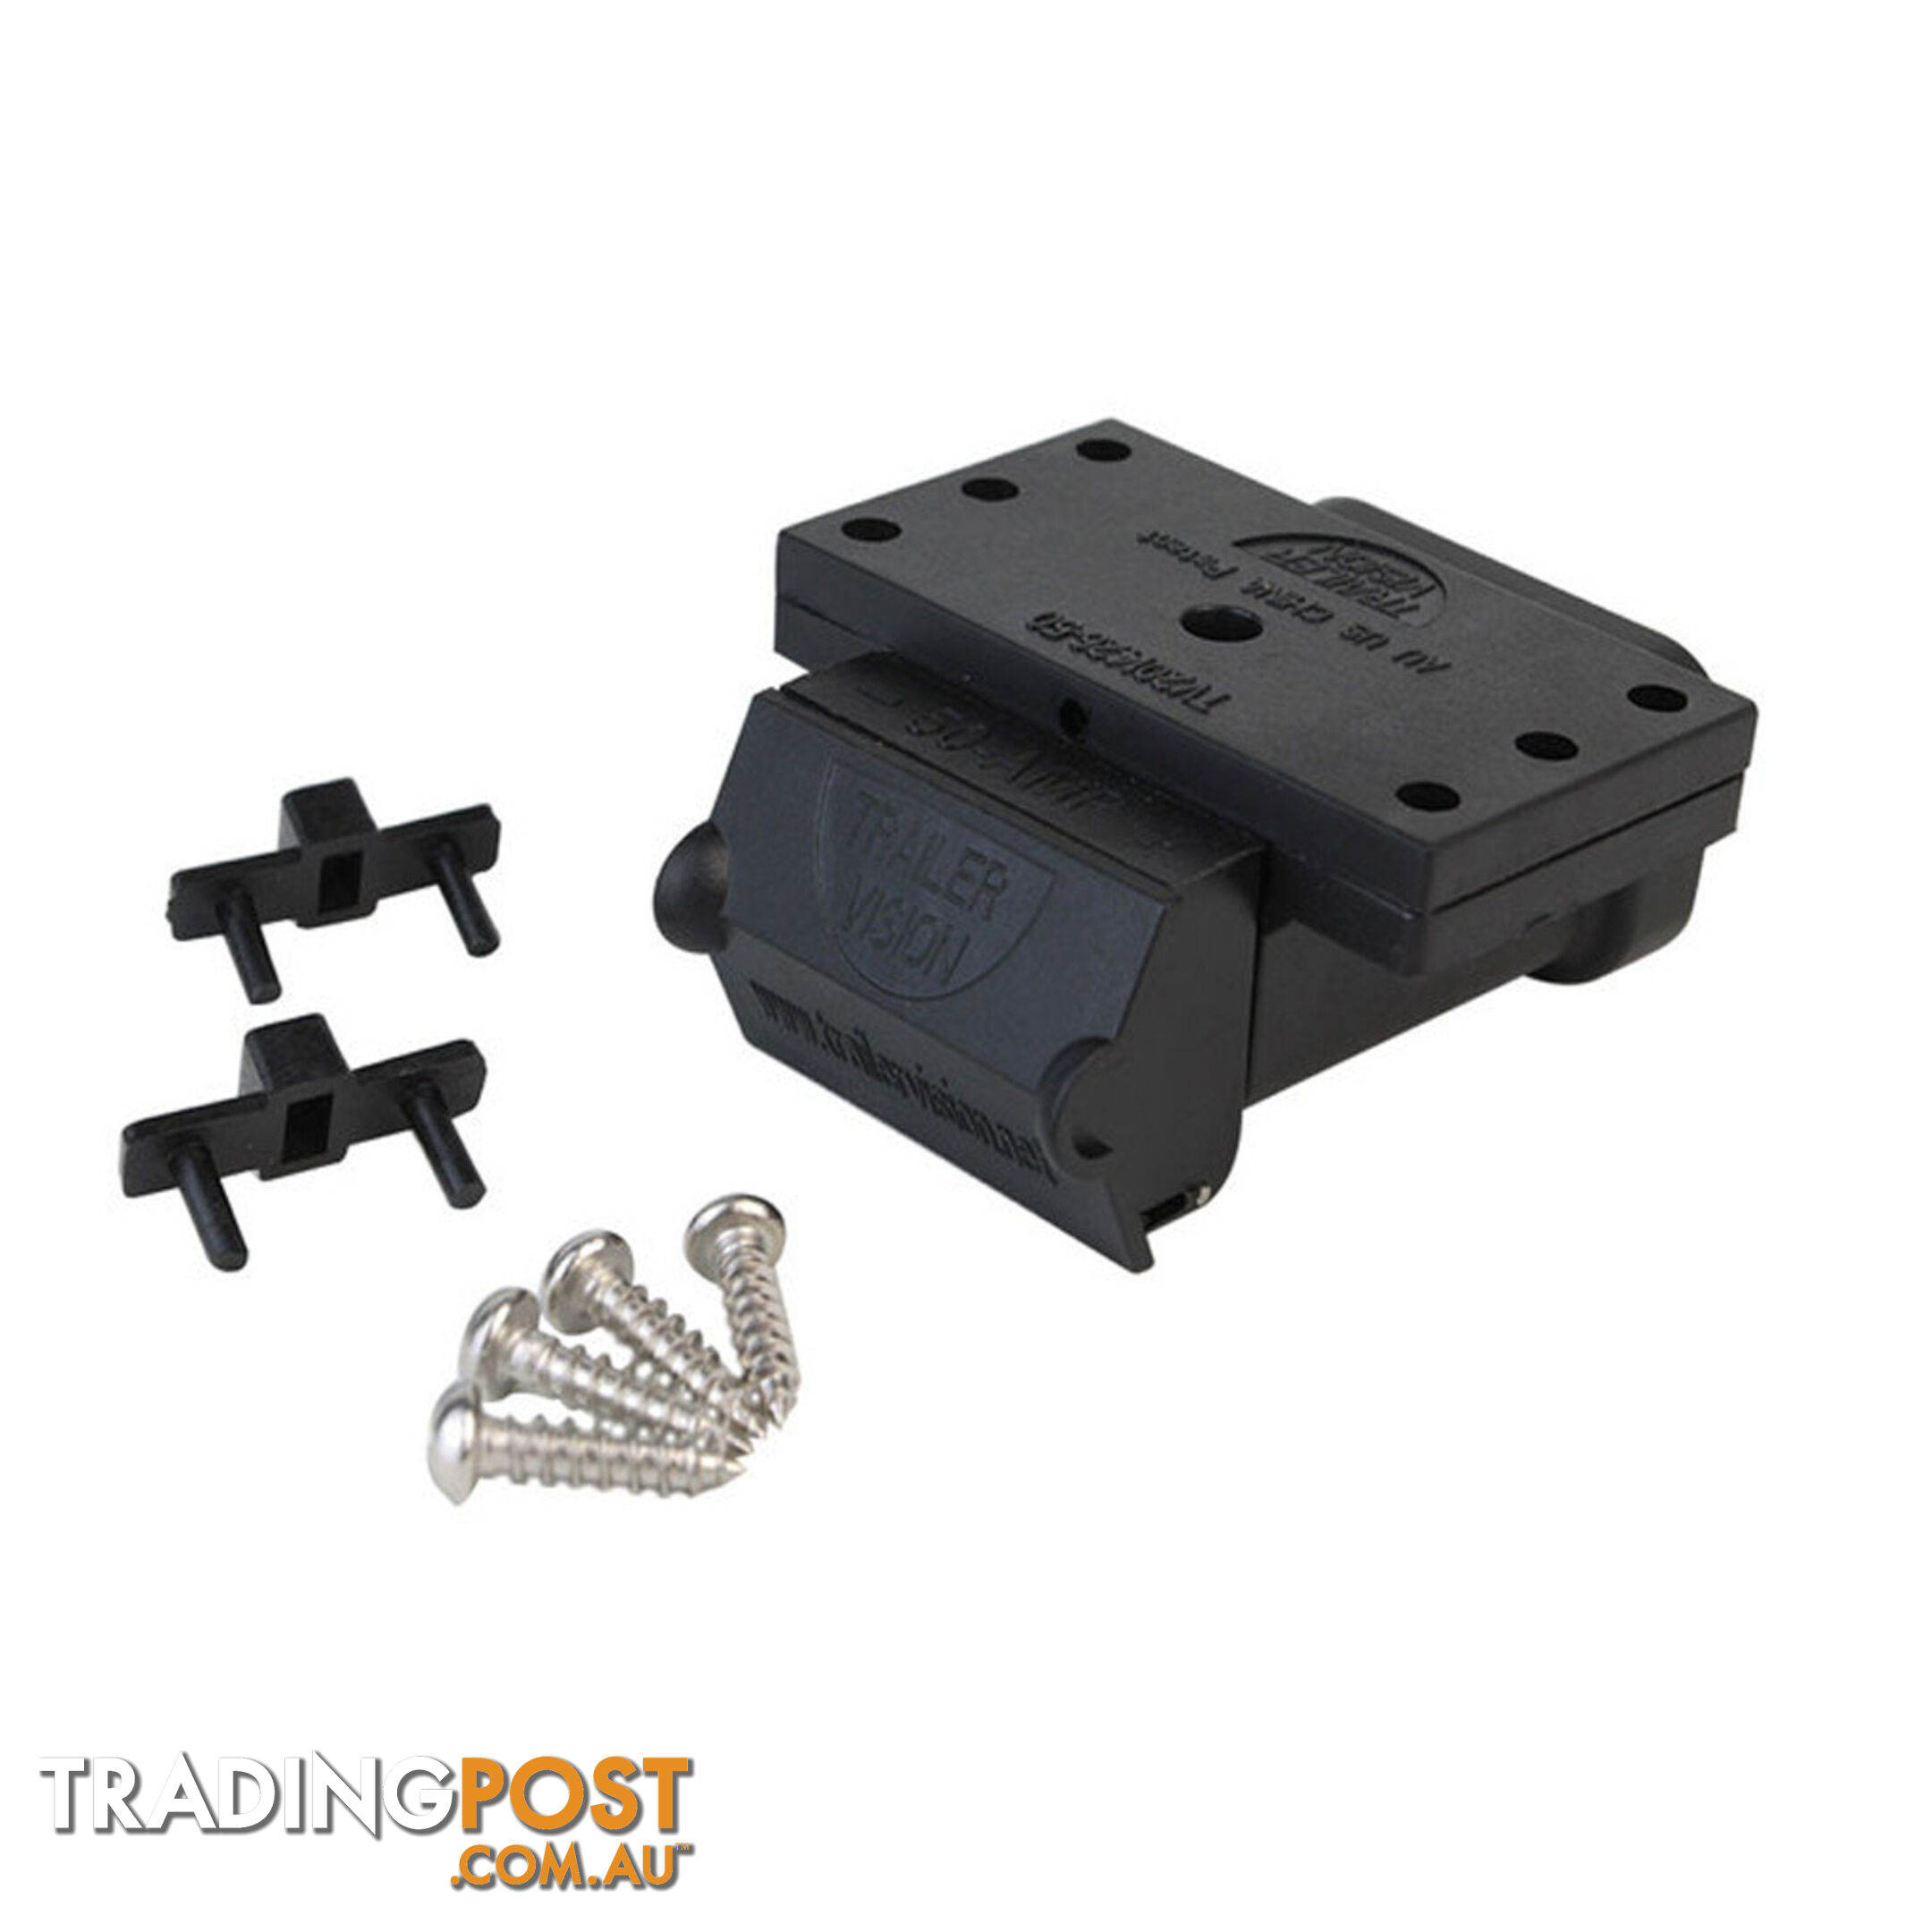 50A Anderson Plug Mounting Kit with LED and 50 amp Anderson Style Plug SKU - TV-201426-50Combo